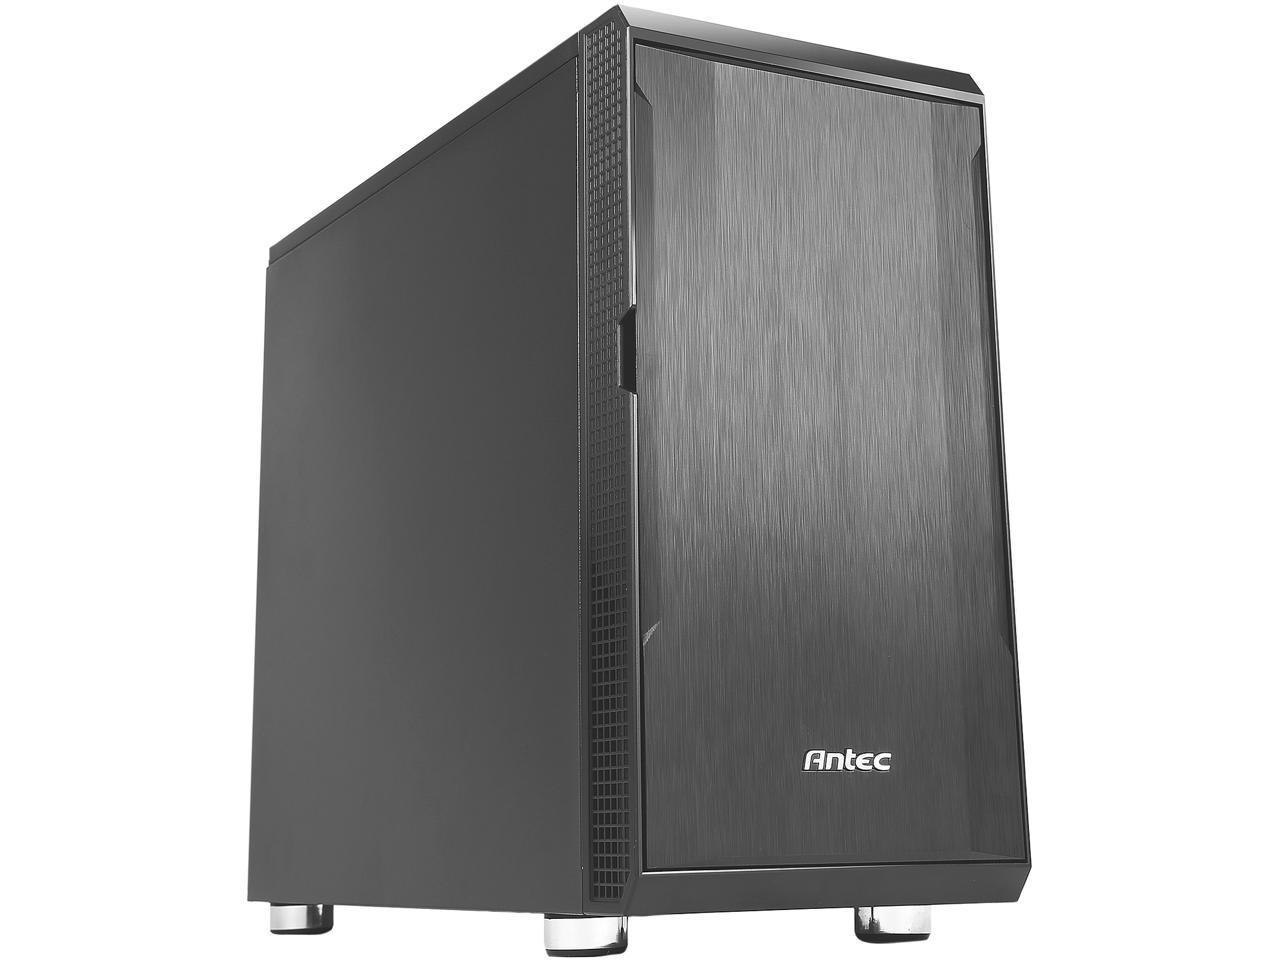 Antec Performance Series P5 Micro-Tower Computer Case